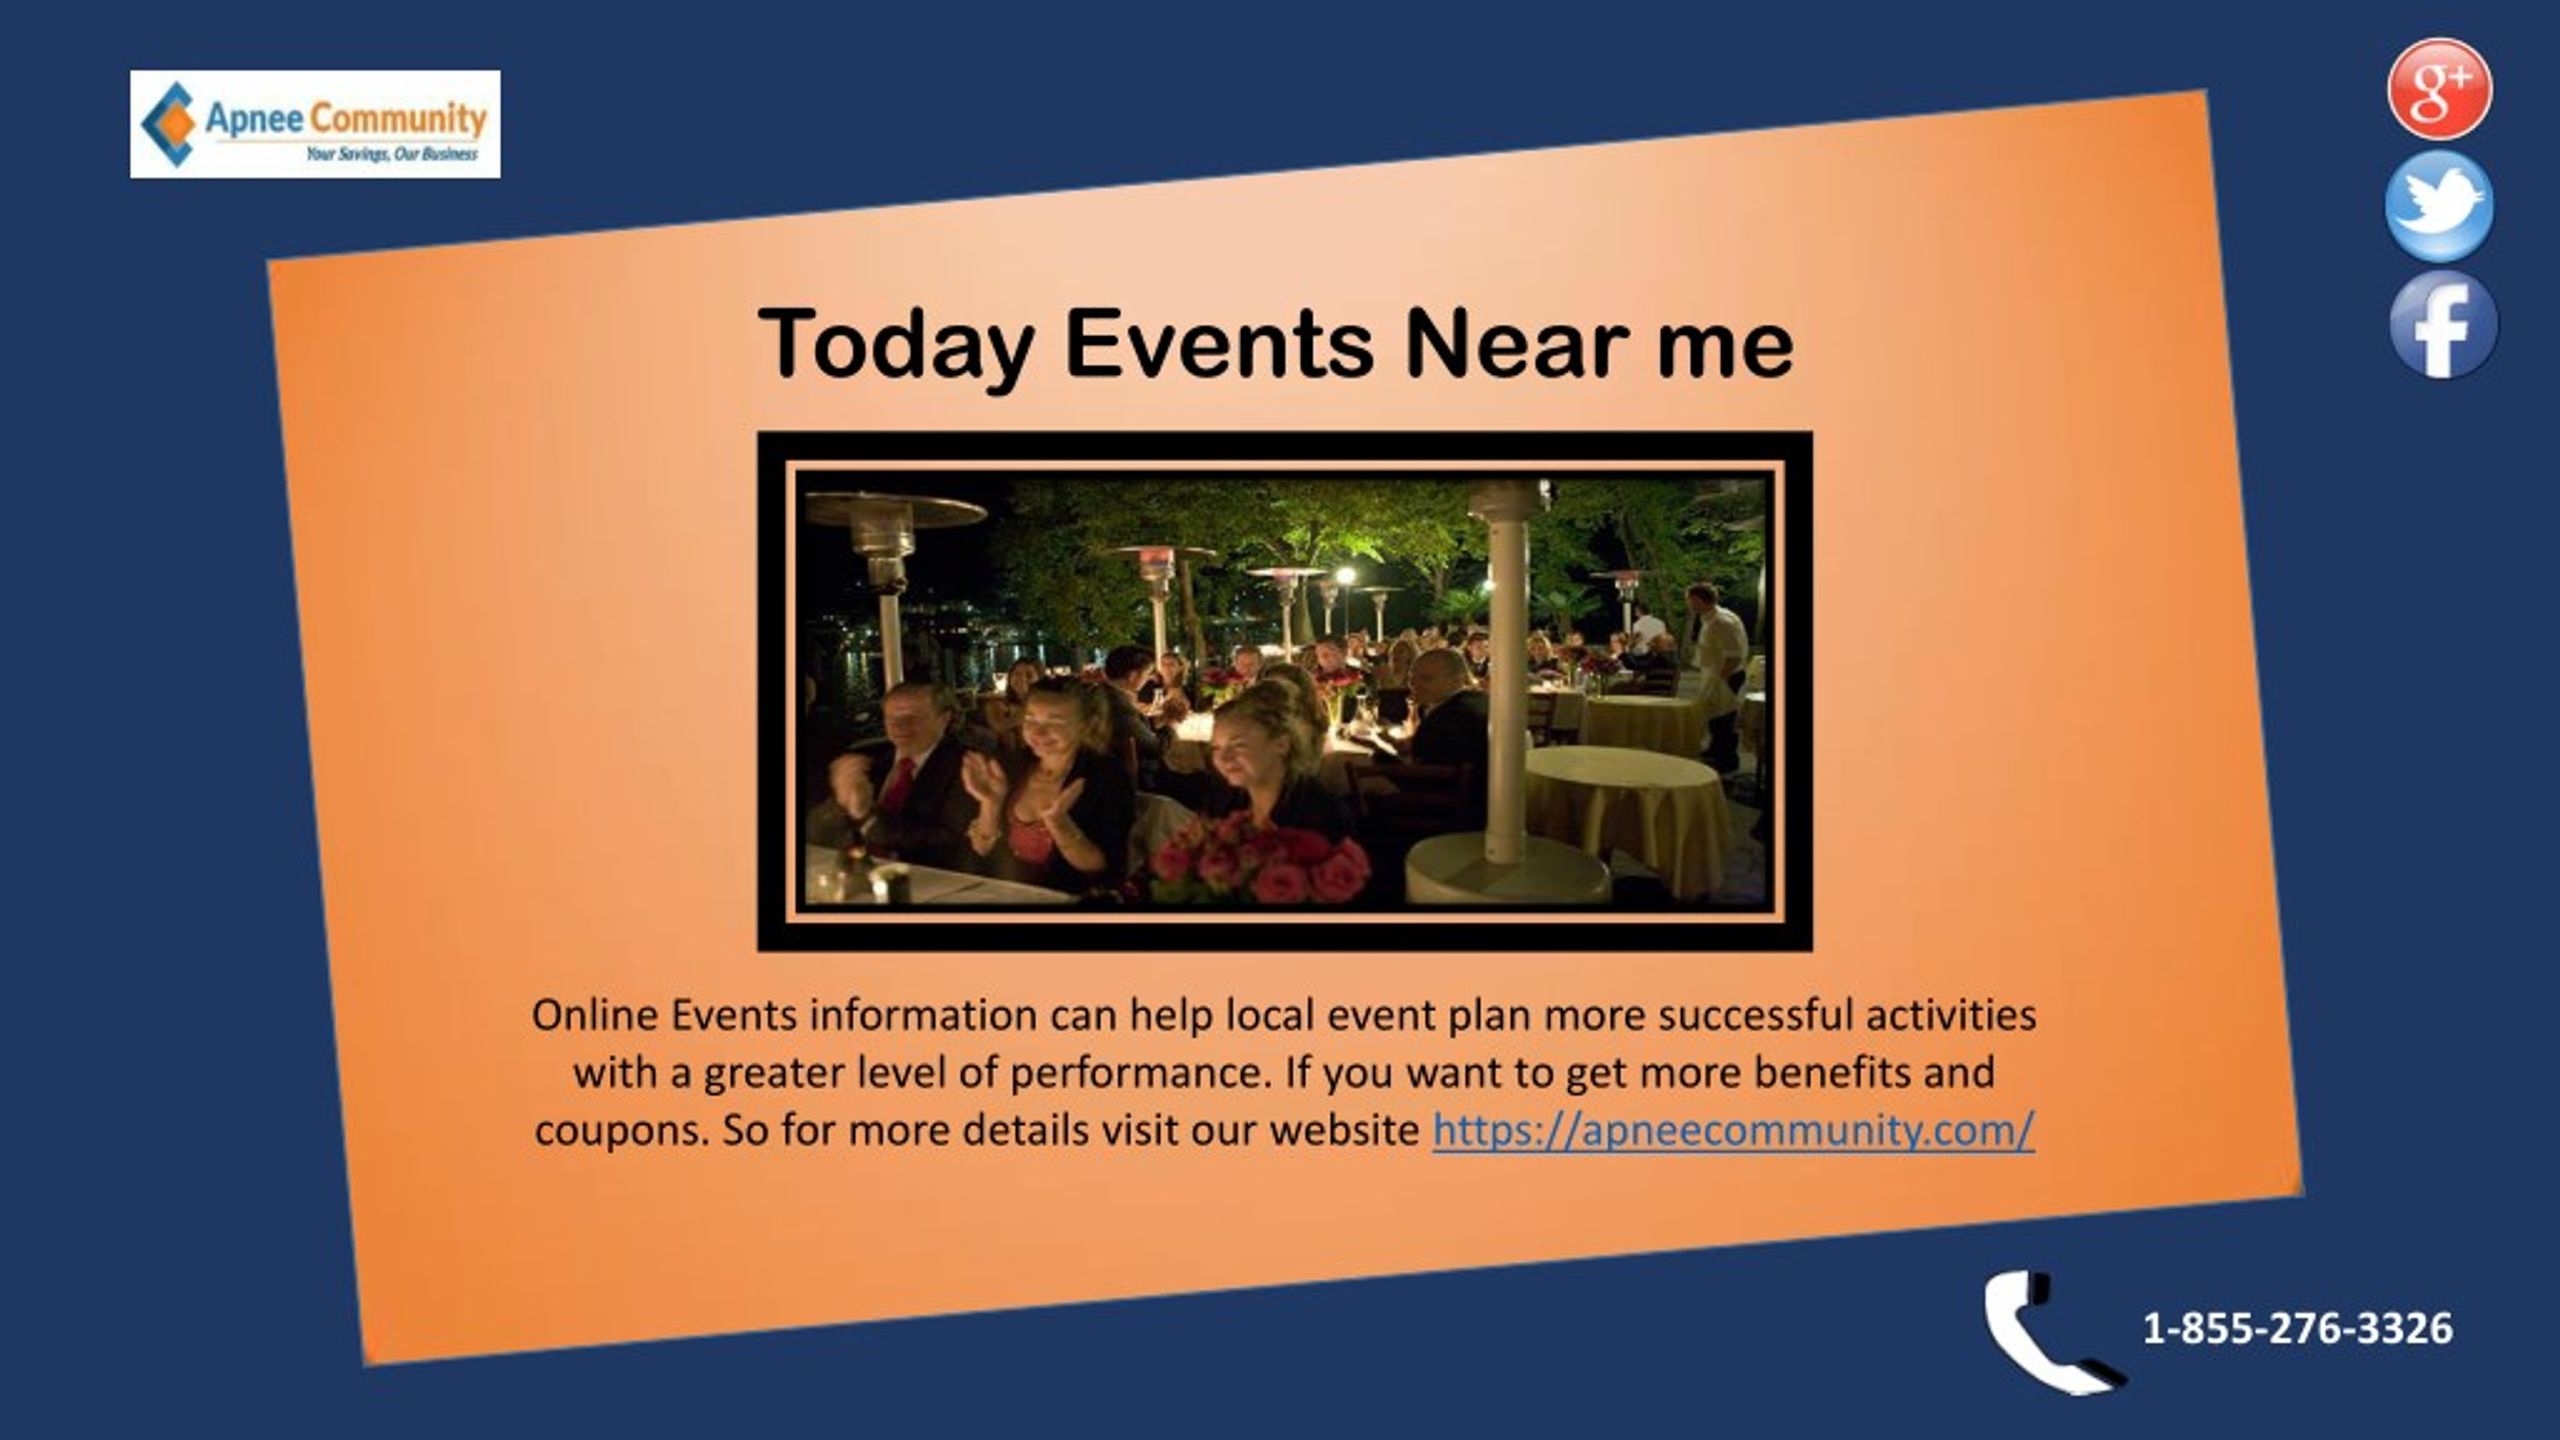 PPT Find online Local Events, Deals & Coupons, and Free Rental